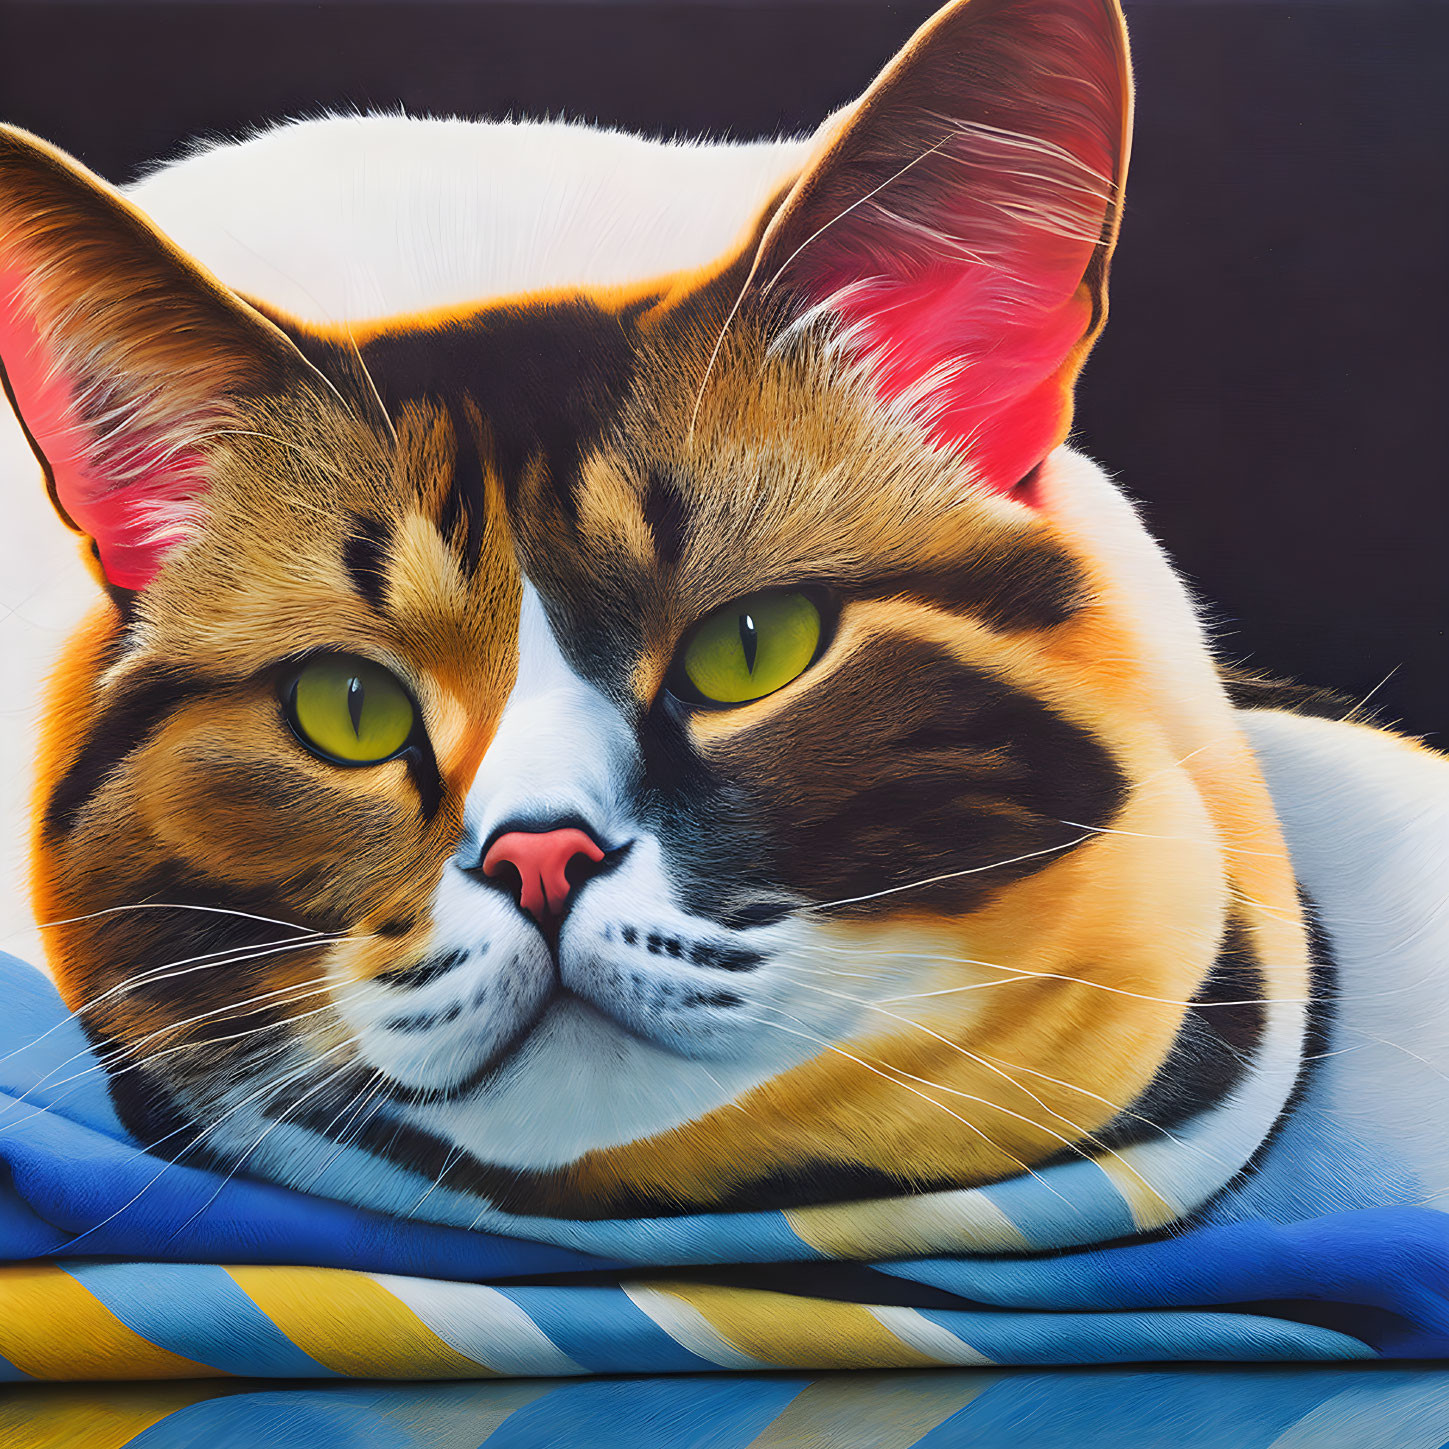 Detailed Close-Up Illustration of Calico Cat with Yellow Eyes and Striped Scarf